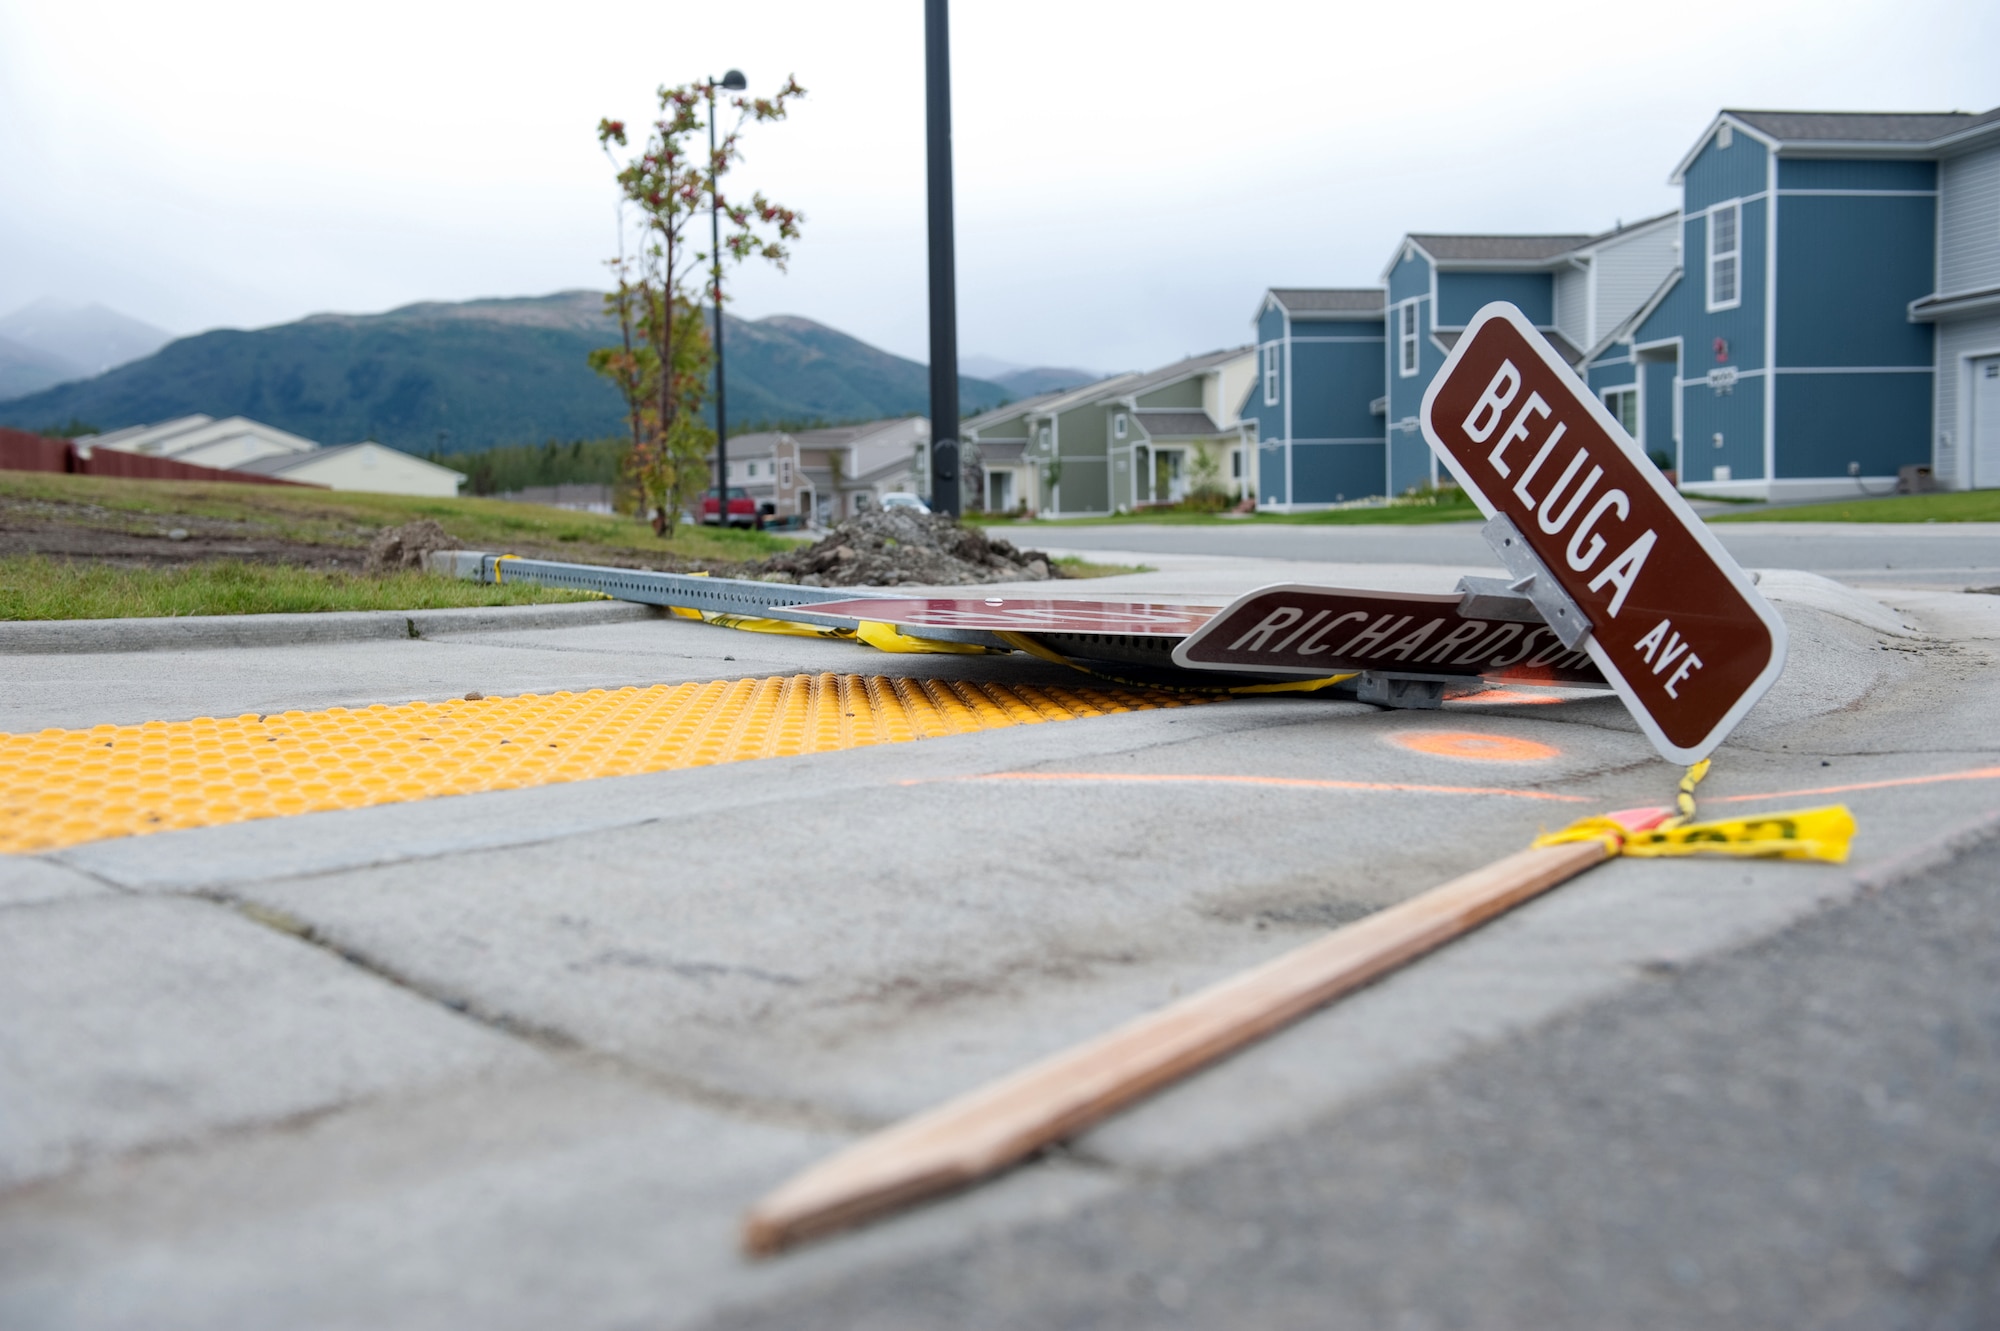 An arctic storm, producing winds gusting to more than 100 miles per hour, caused extensive damage Sept. 4 and 5, including knocking down street signs and trees on Joint Base Elmendorf-Richardson, Alaska. Emergency personnel's first priority after the storm was clearing streets for safe traffic flow. (U.S. Air Force photo/Staff Sgt. Robert Barnett)